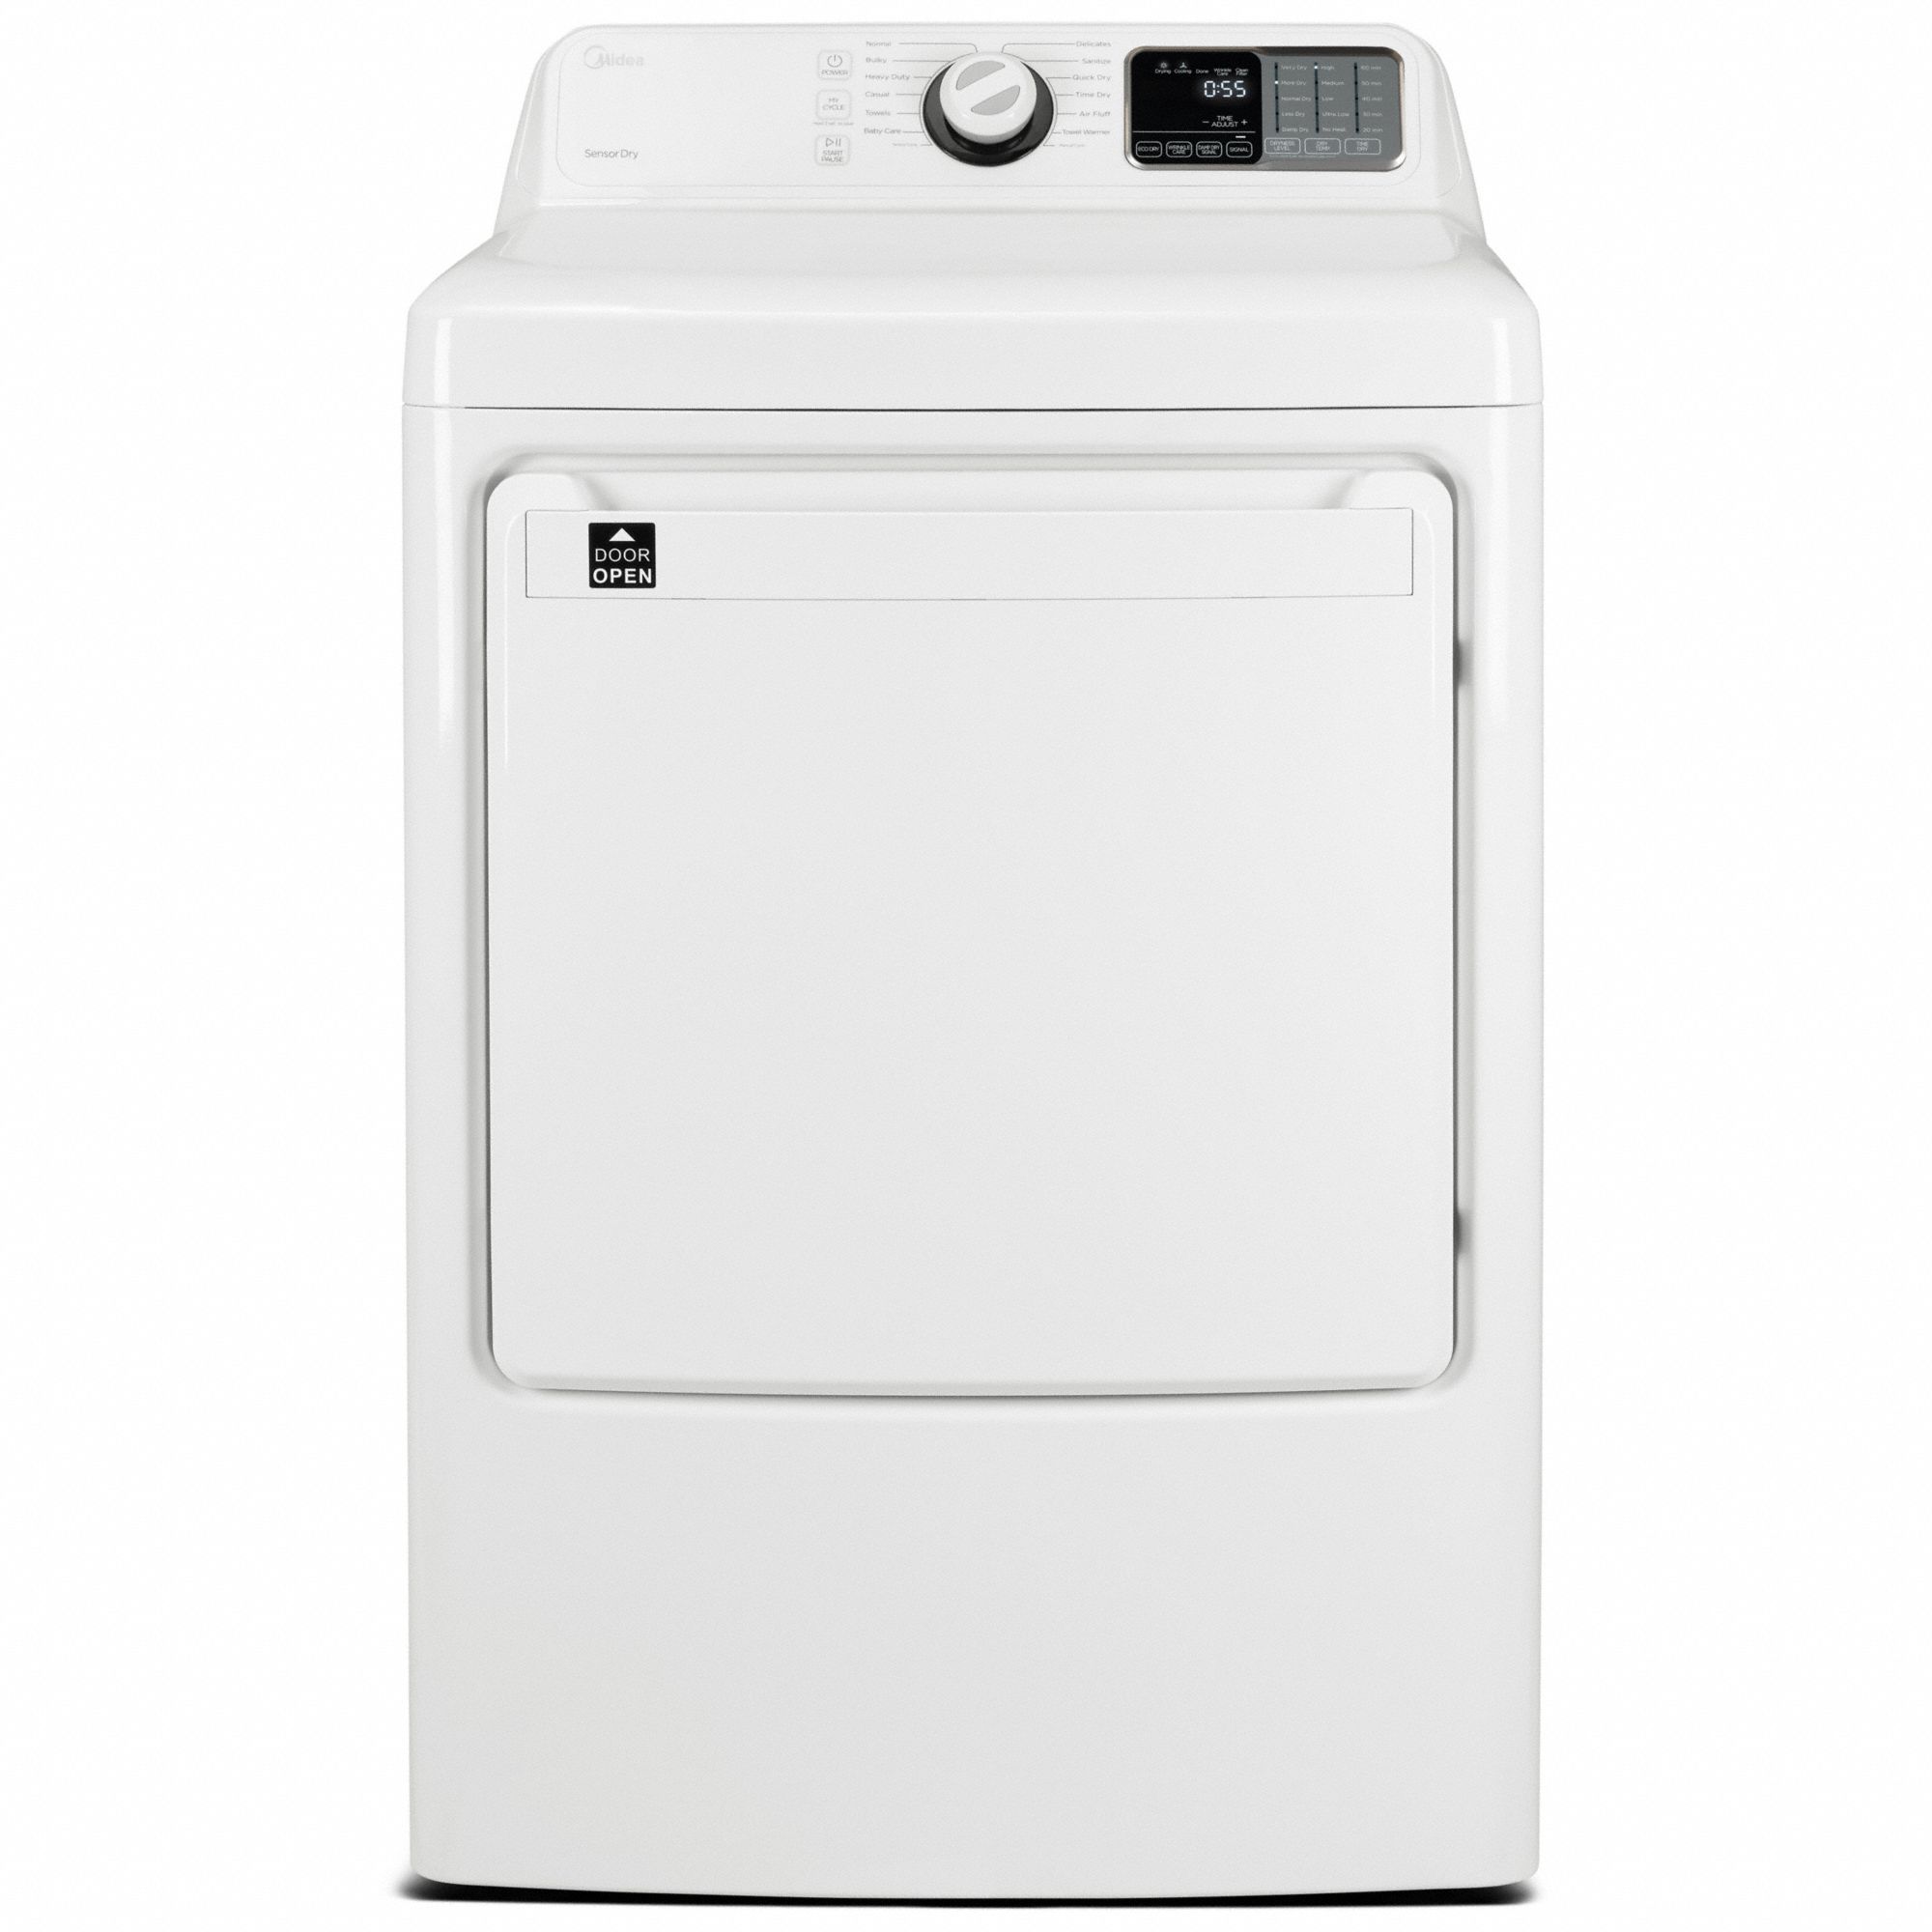 Dryer: Electric, White, 7.5 cu ft Capacity